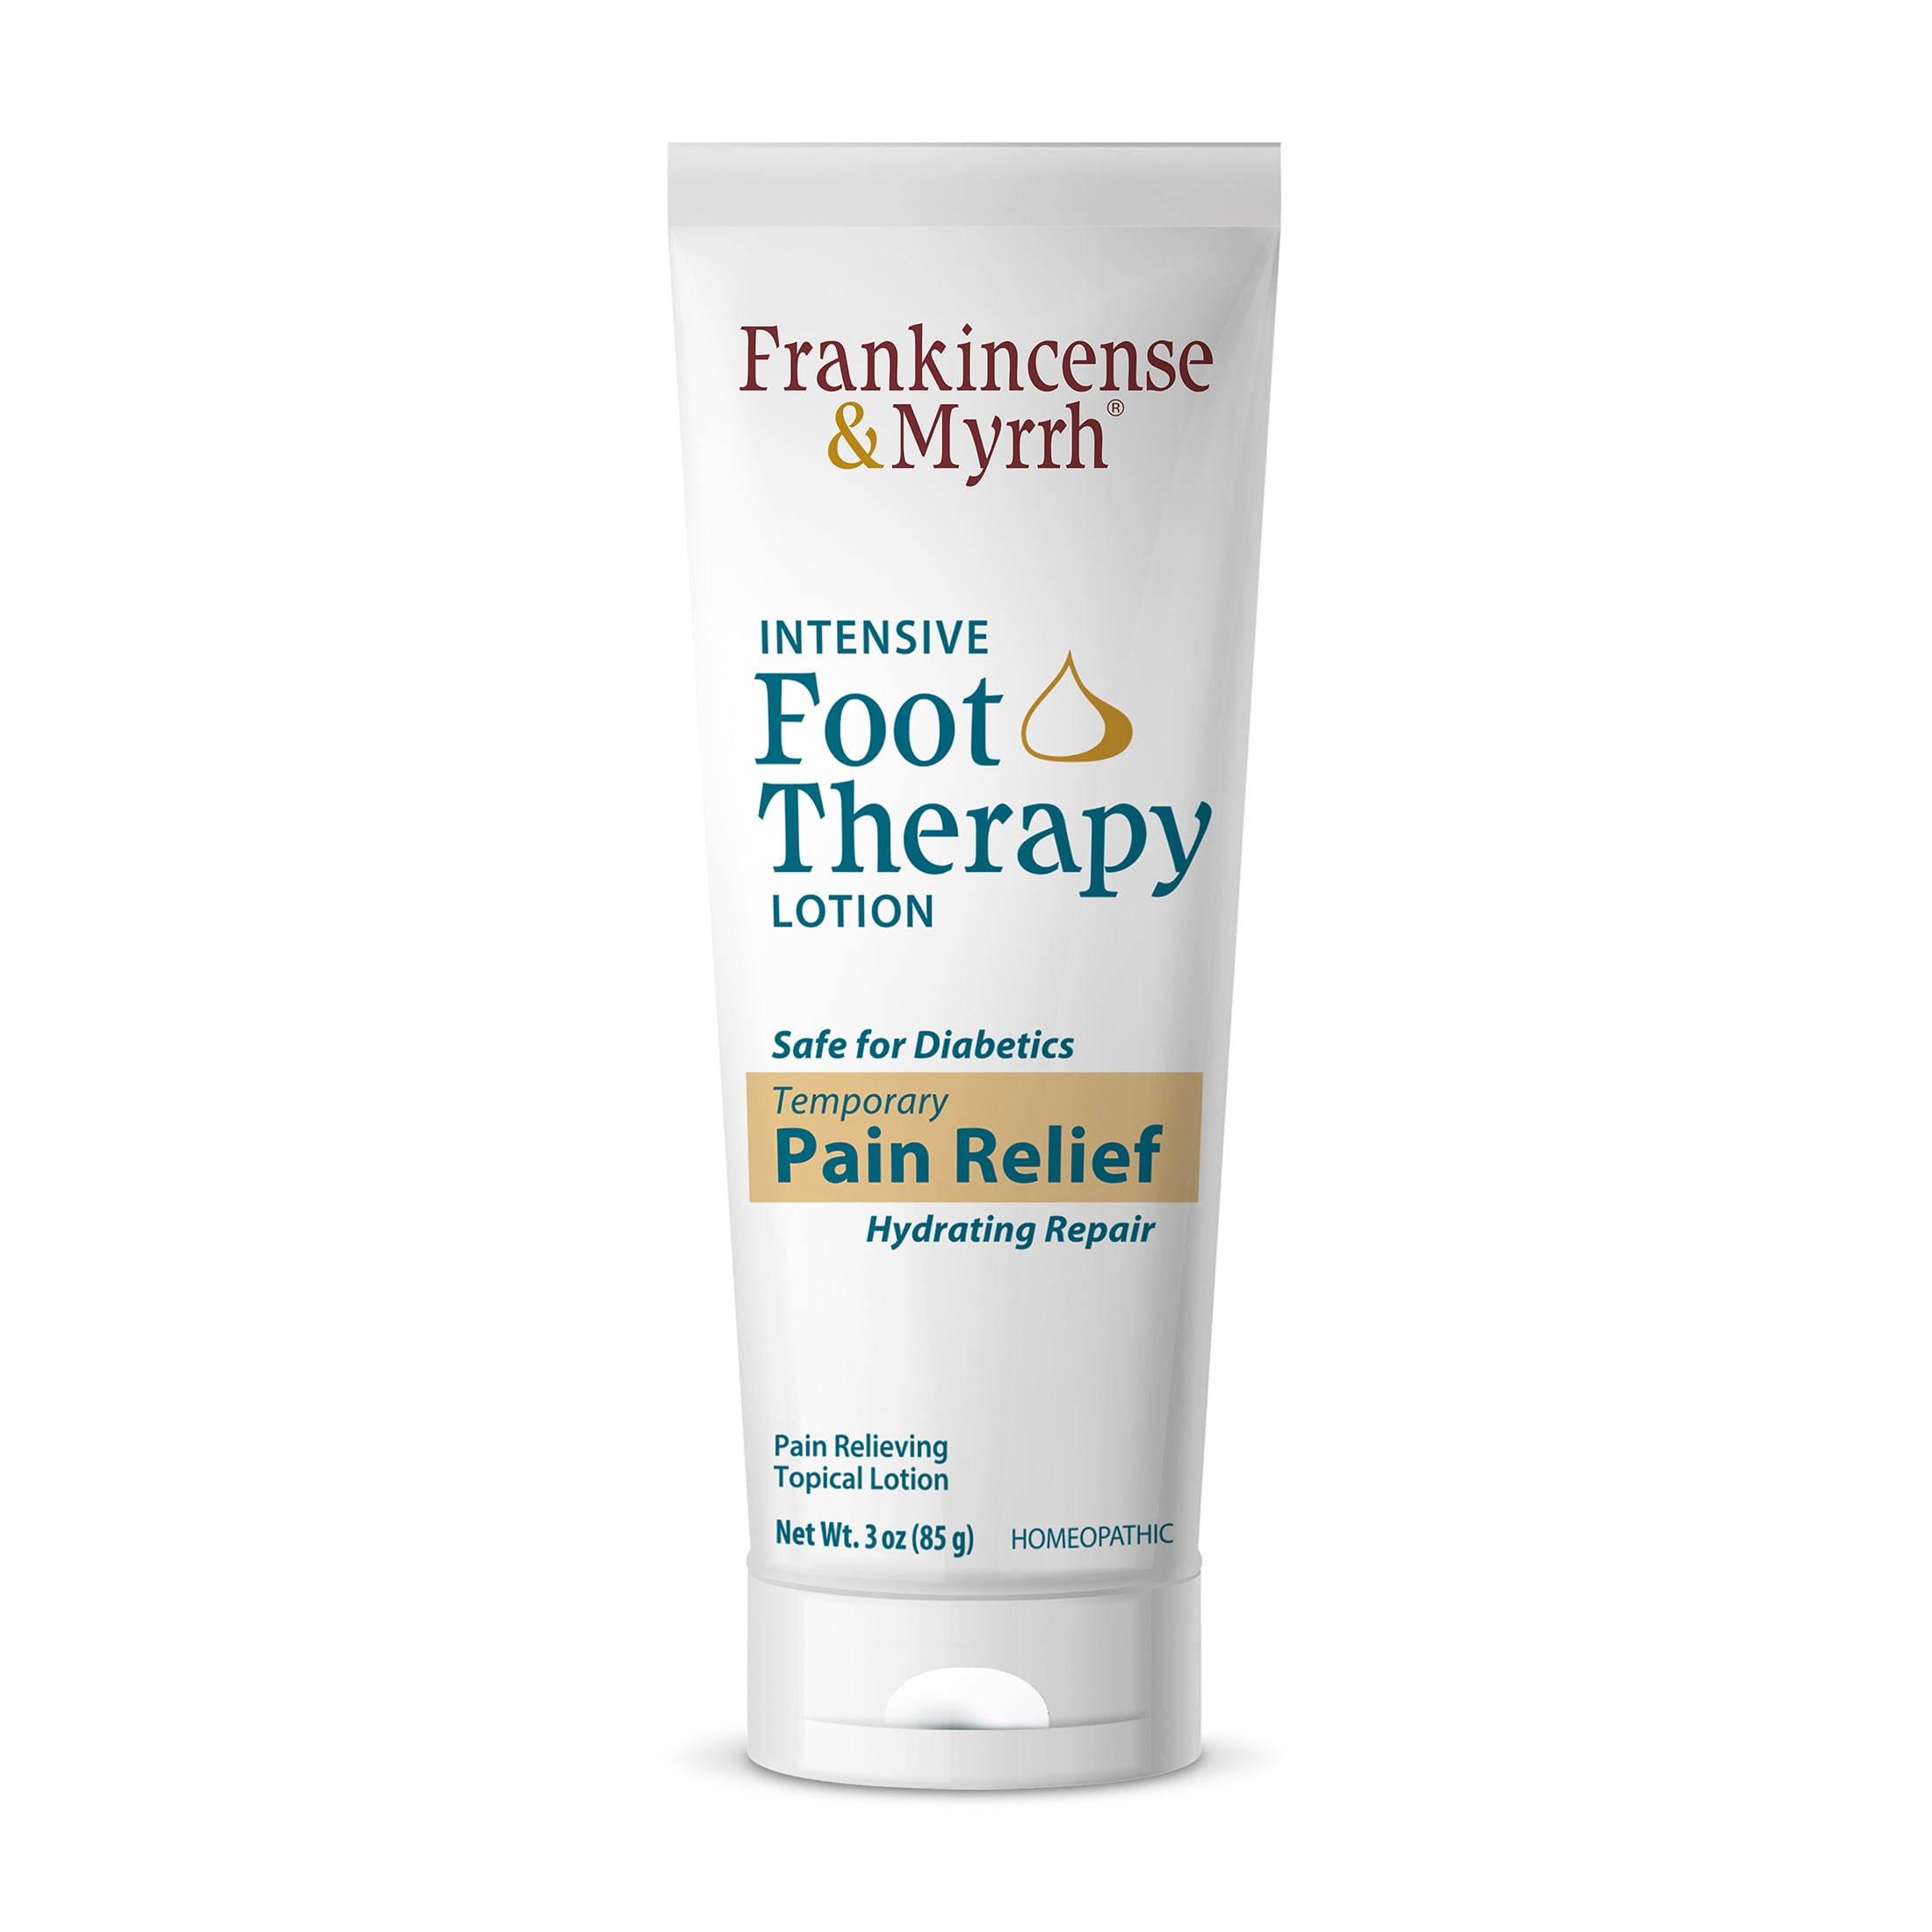  Foot Healing Cream – Frankincense and Sweet Myrrh Moisturizer  for Sensitive Skin, Foot Therapy, Diabetic Skin Healing - Synergistic  Action, Deeply Nourishing, Relieving by Balm of Gilead : Health & Household